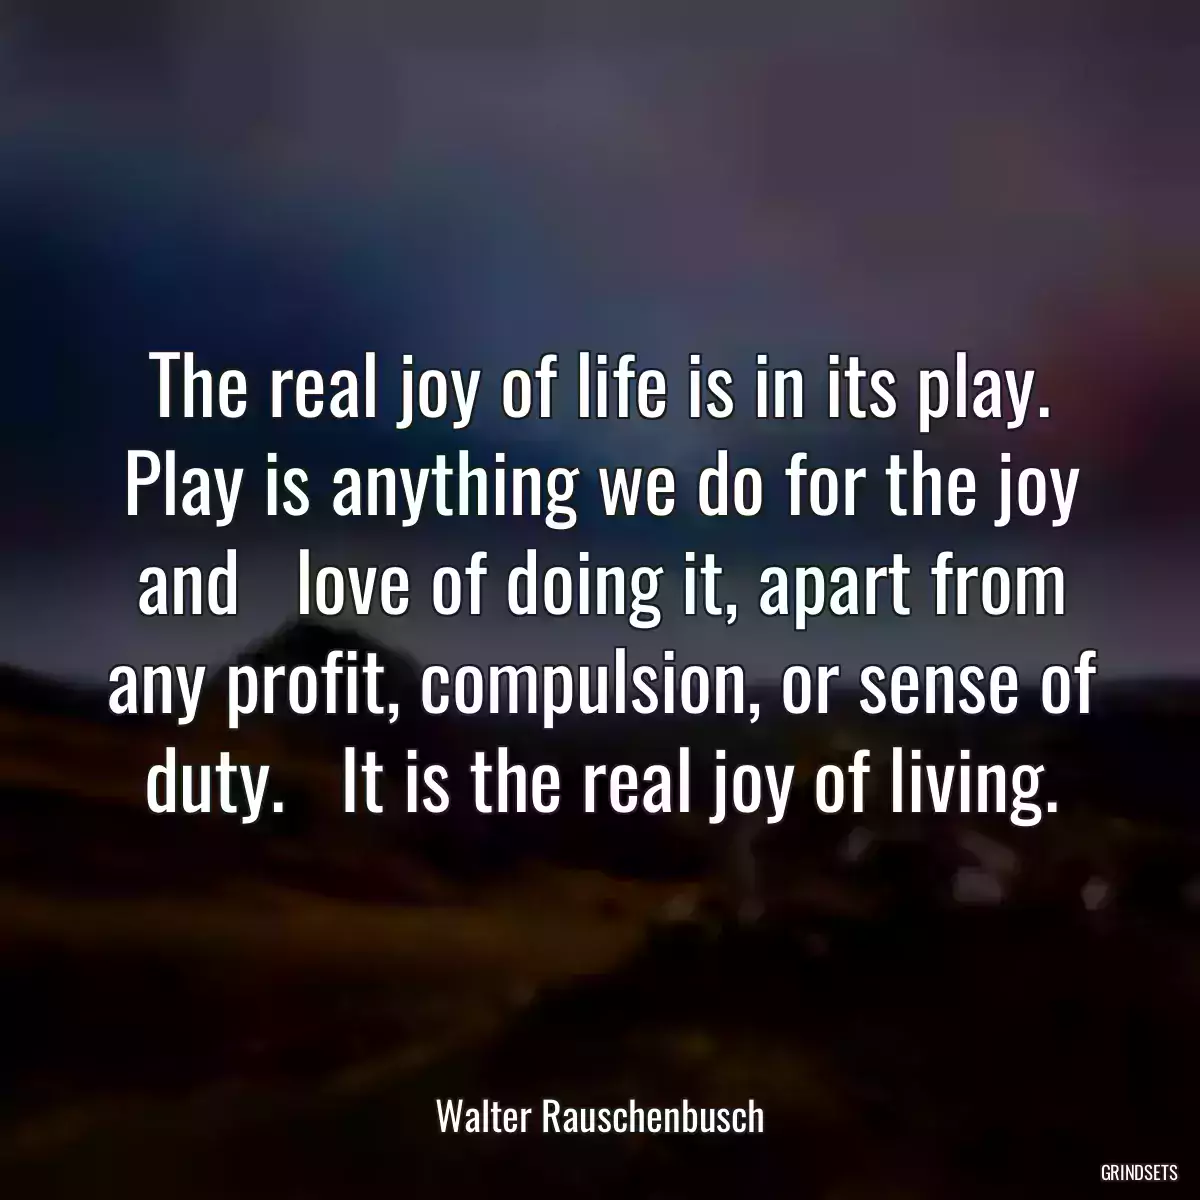 The real joy of life is in its play. Play is anything we do for the joy and   love of doing it, apart from any profit, compulsion, or sense of duty.   It is the real joy of living.